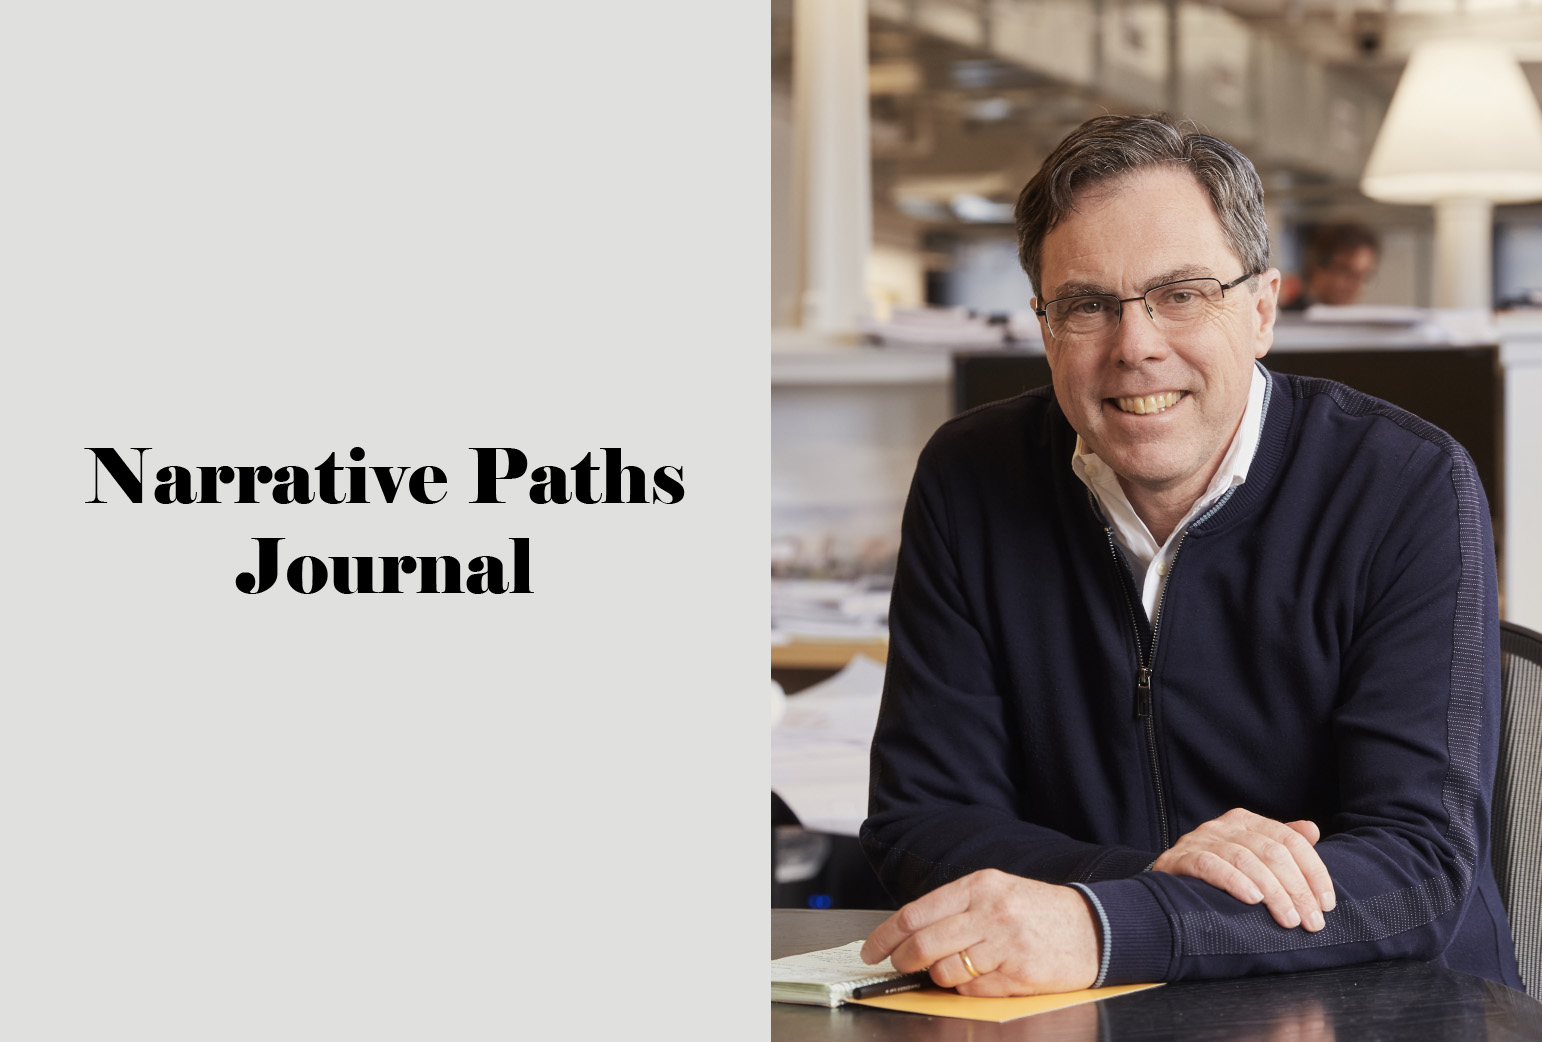 Alexander Lamis contributes post to Narrative Paths Journal